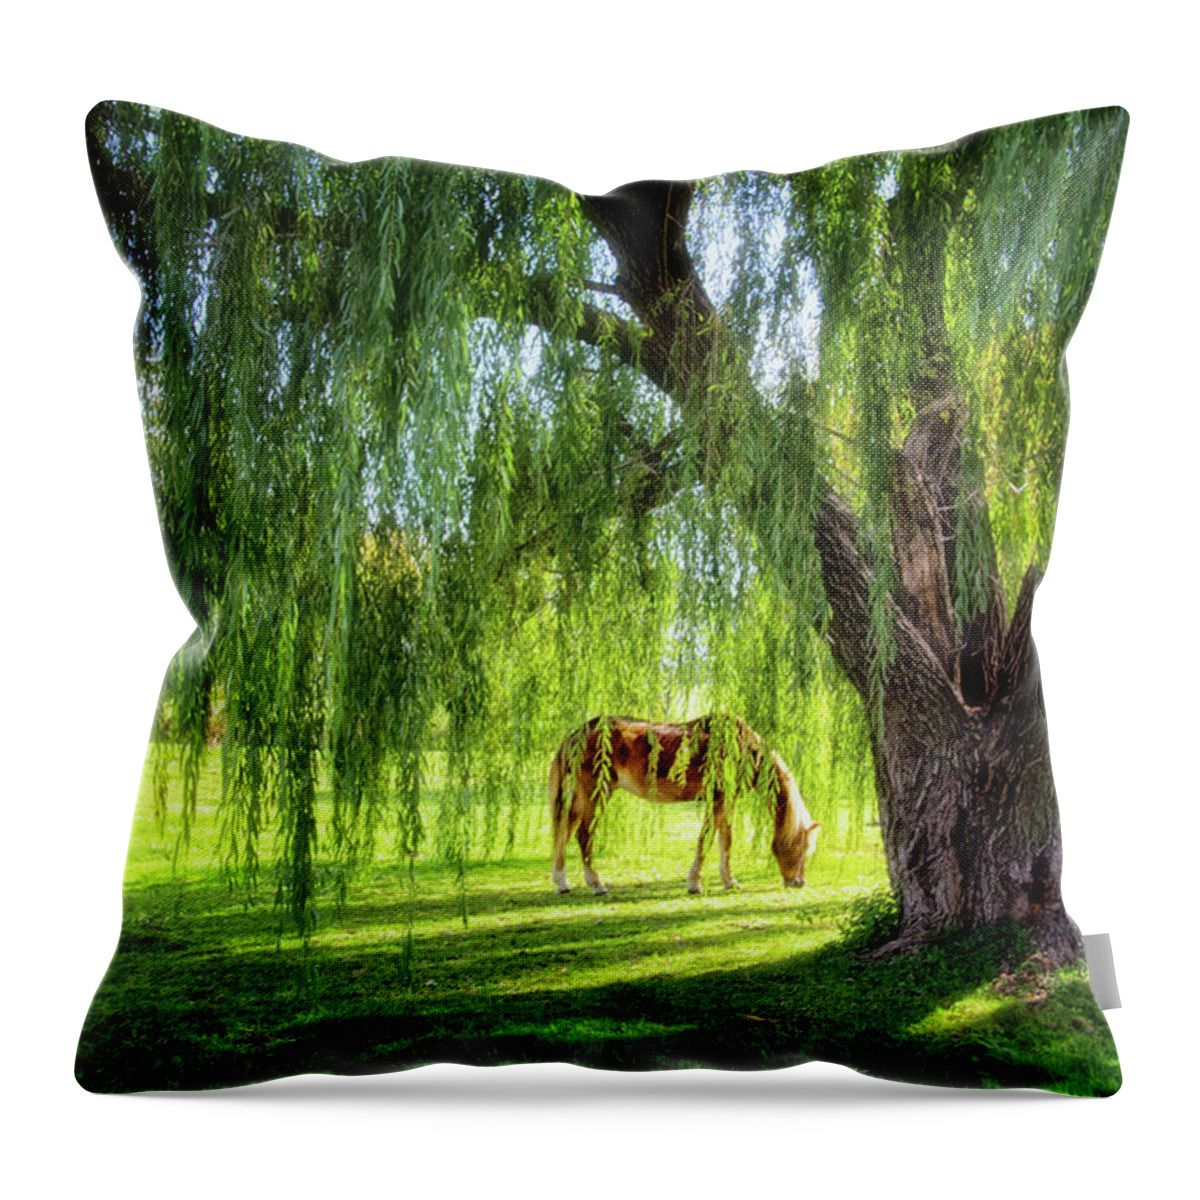 Old Willow Tree In The Meadow Throw Pillow featuring the photograph Old Willow Tree in the Meadow by Carolyn Derstine